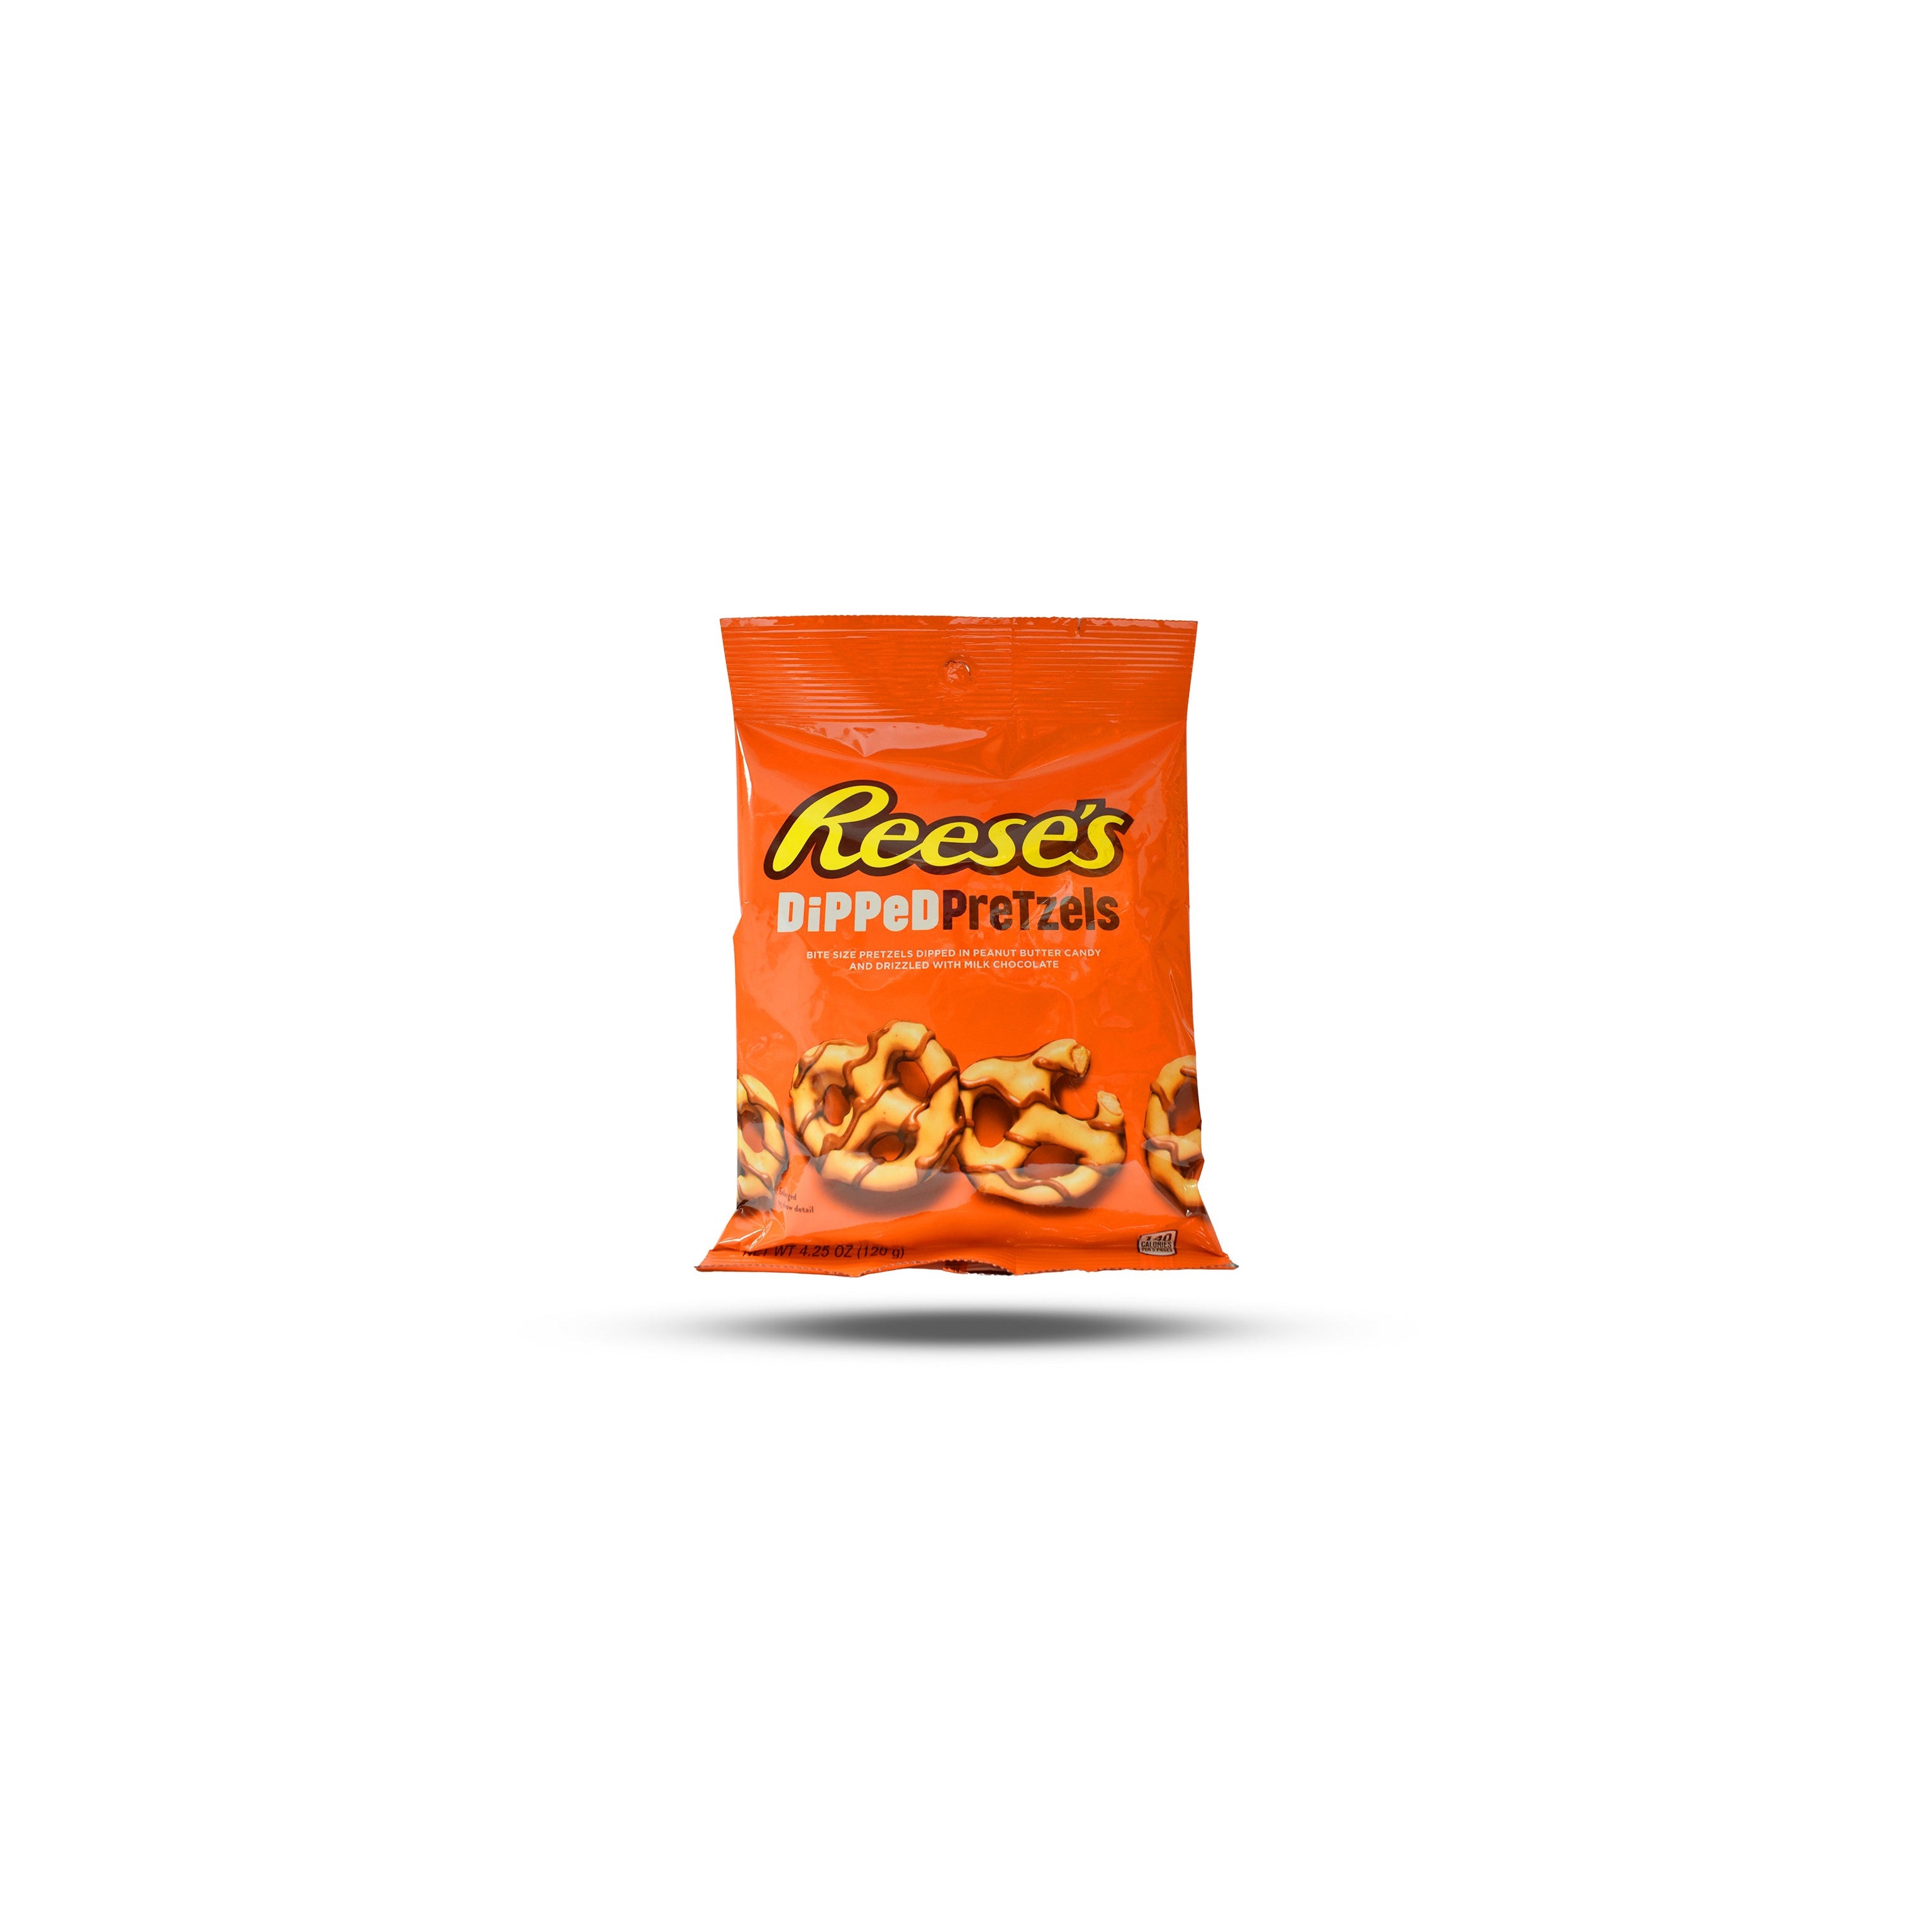 Reese´s Dipped Pretzels 120g-Hershey's-SNACK SHOP AUSTRIA